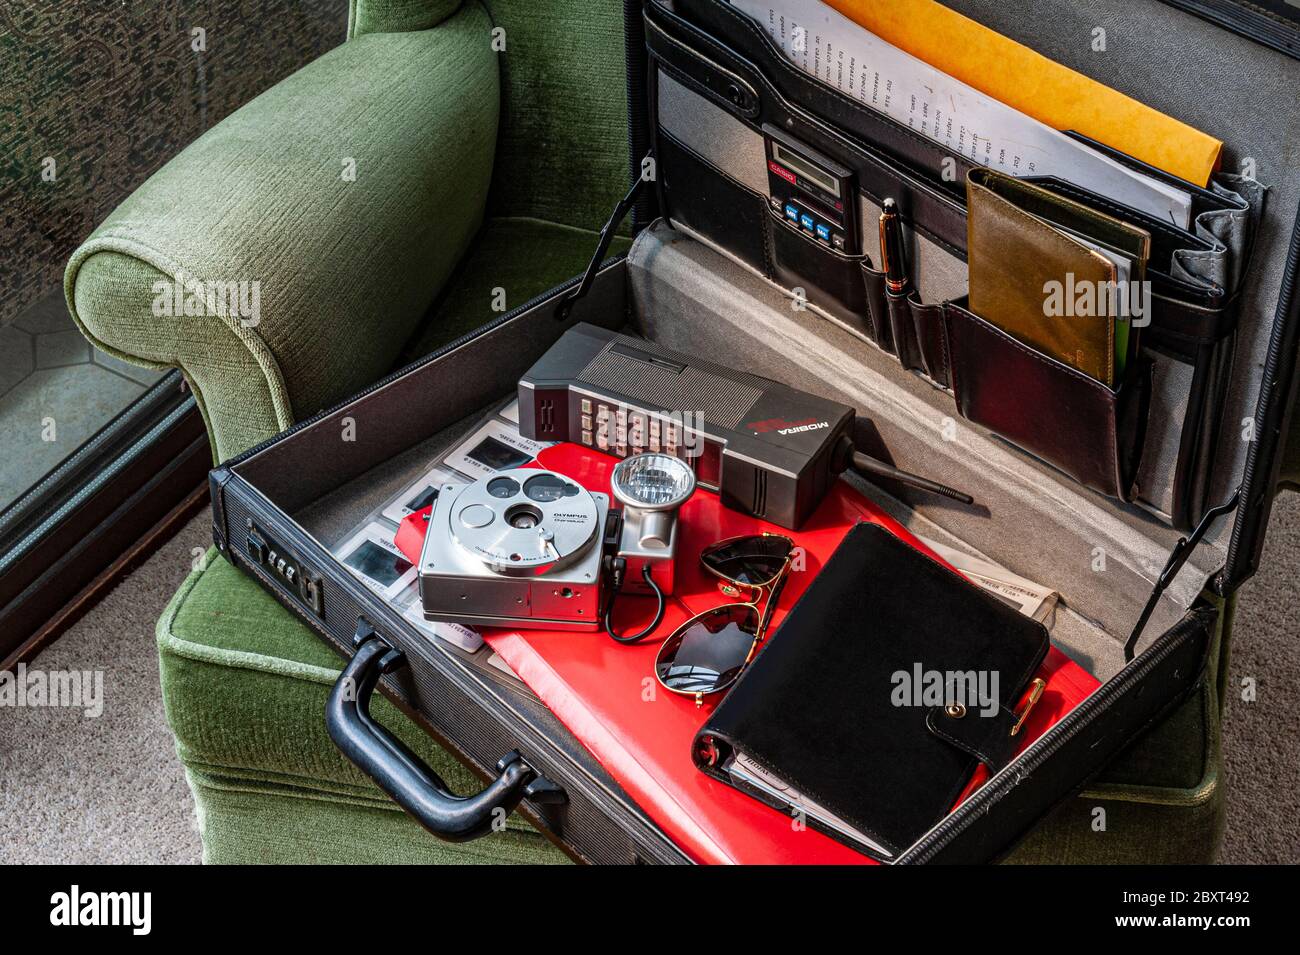 1980's technology items in briefcase incl. Mobira Cityman mobile phone,  Olympus O 35mm camera, Filofax diary, aviator sunglasses, cheque book & chair Stock Photo